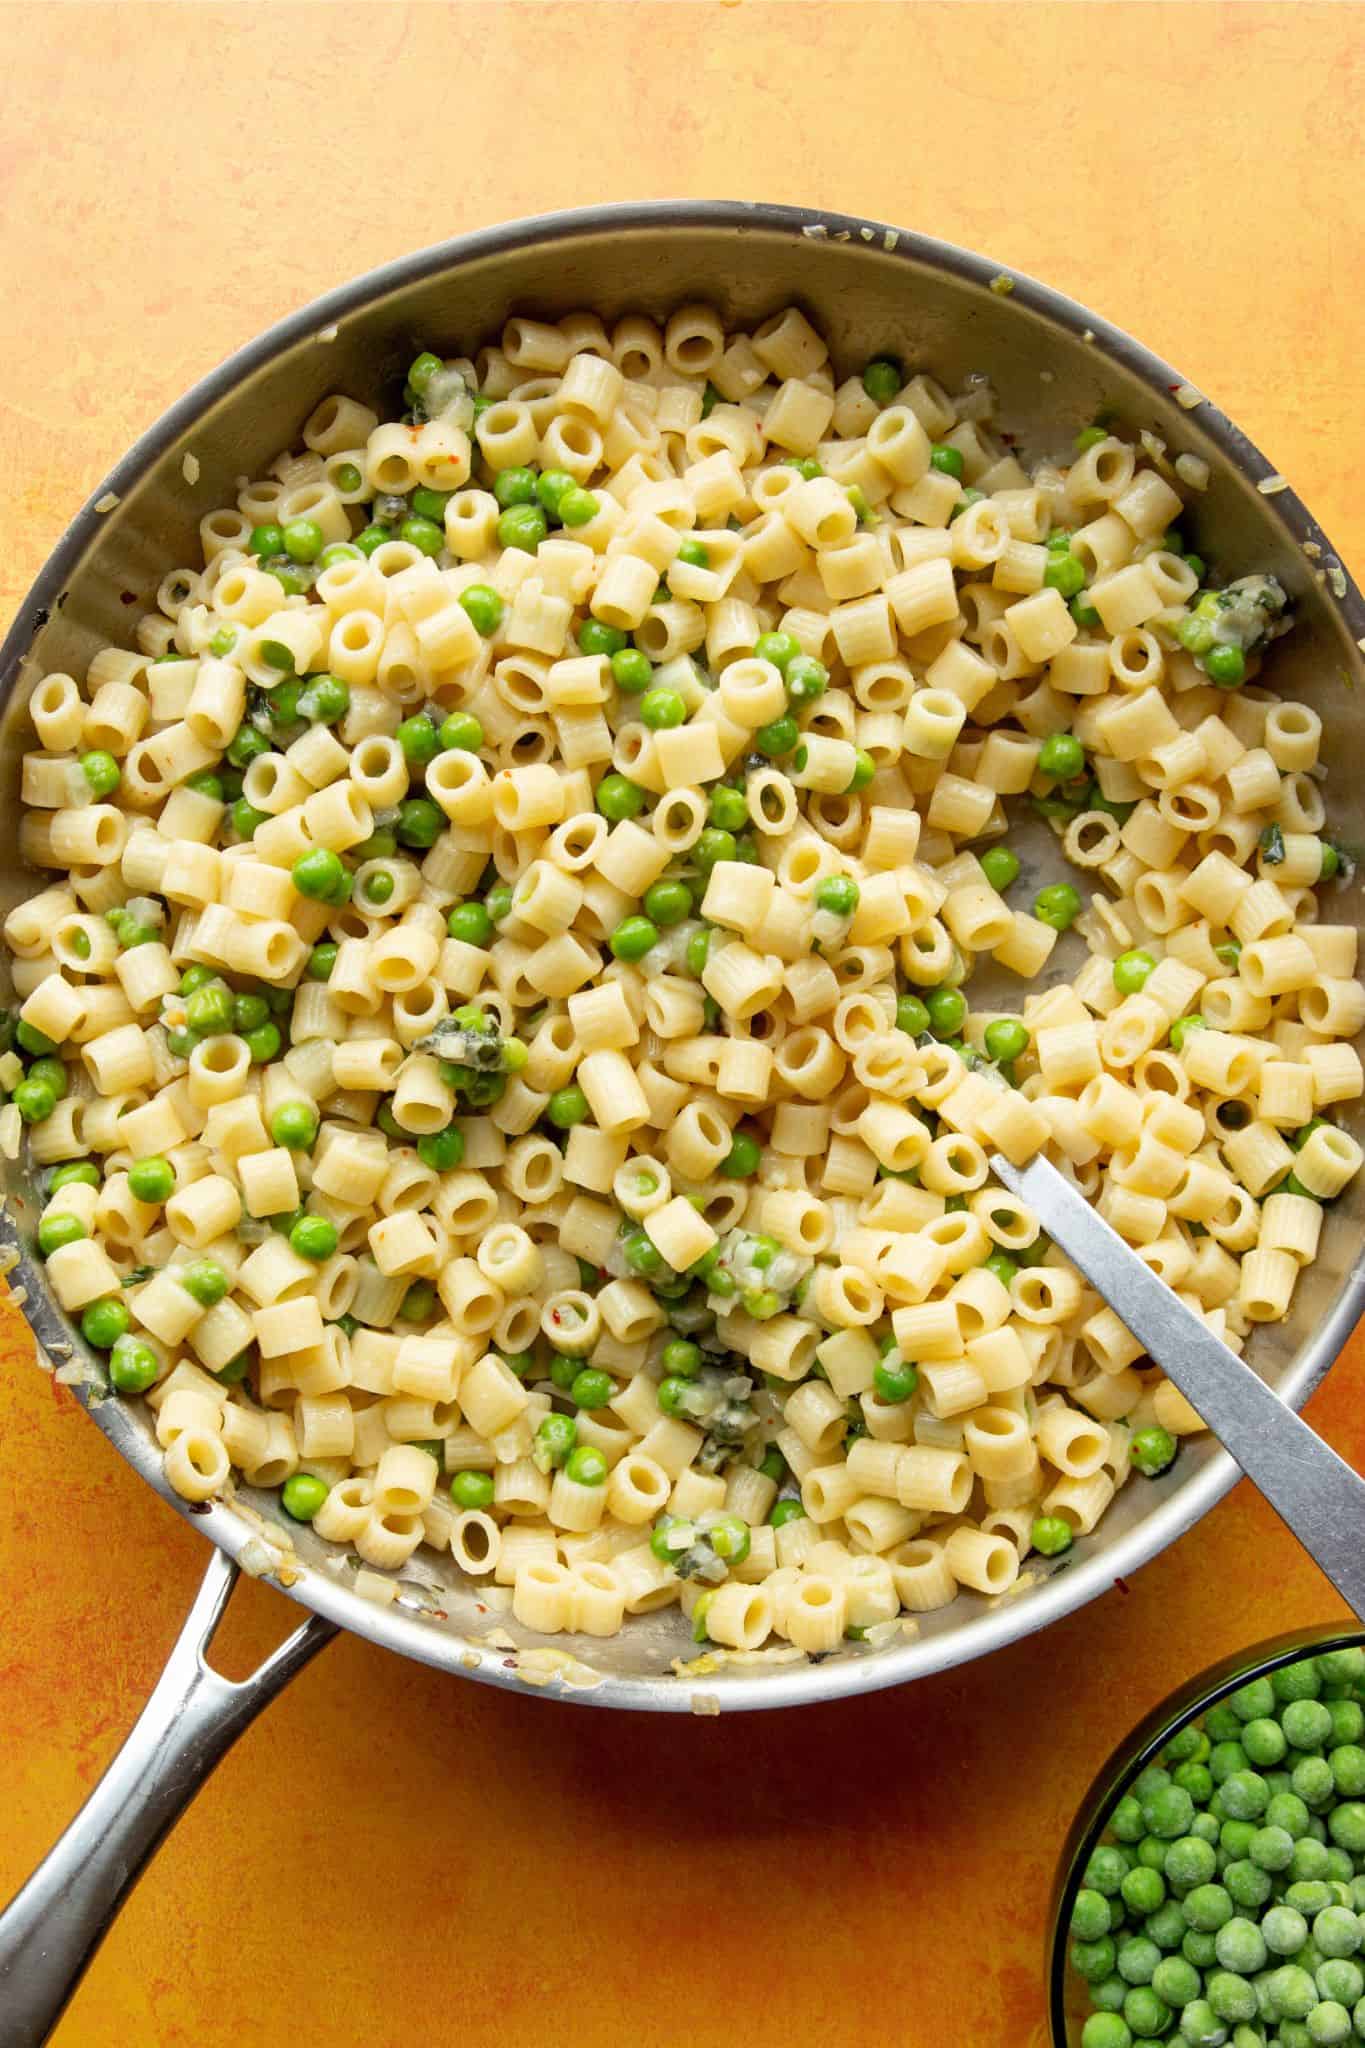 Pasta with peas with Ditali (short tubes of pasta) in a large stainless steel pan with metal spoon with bowl of peas.